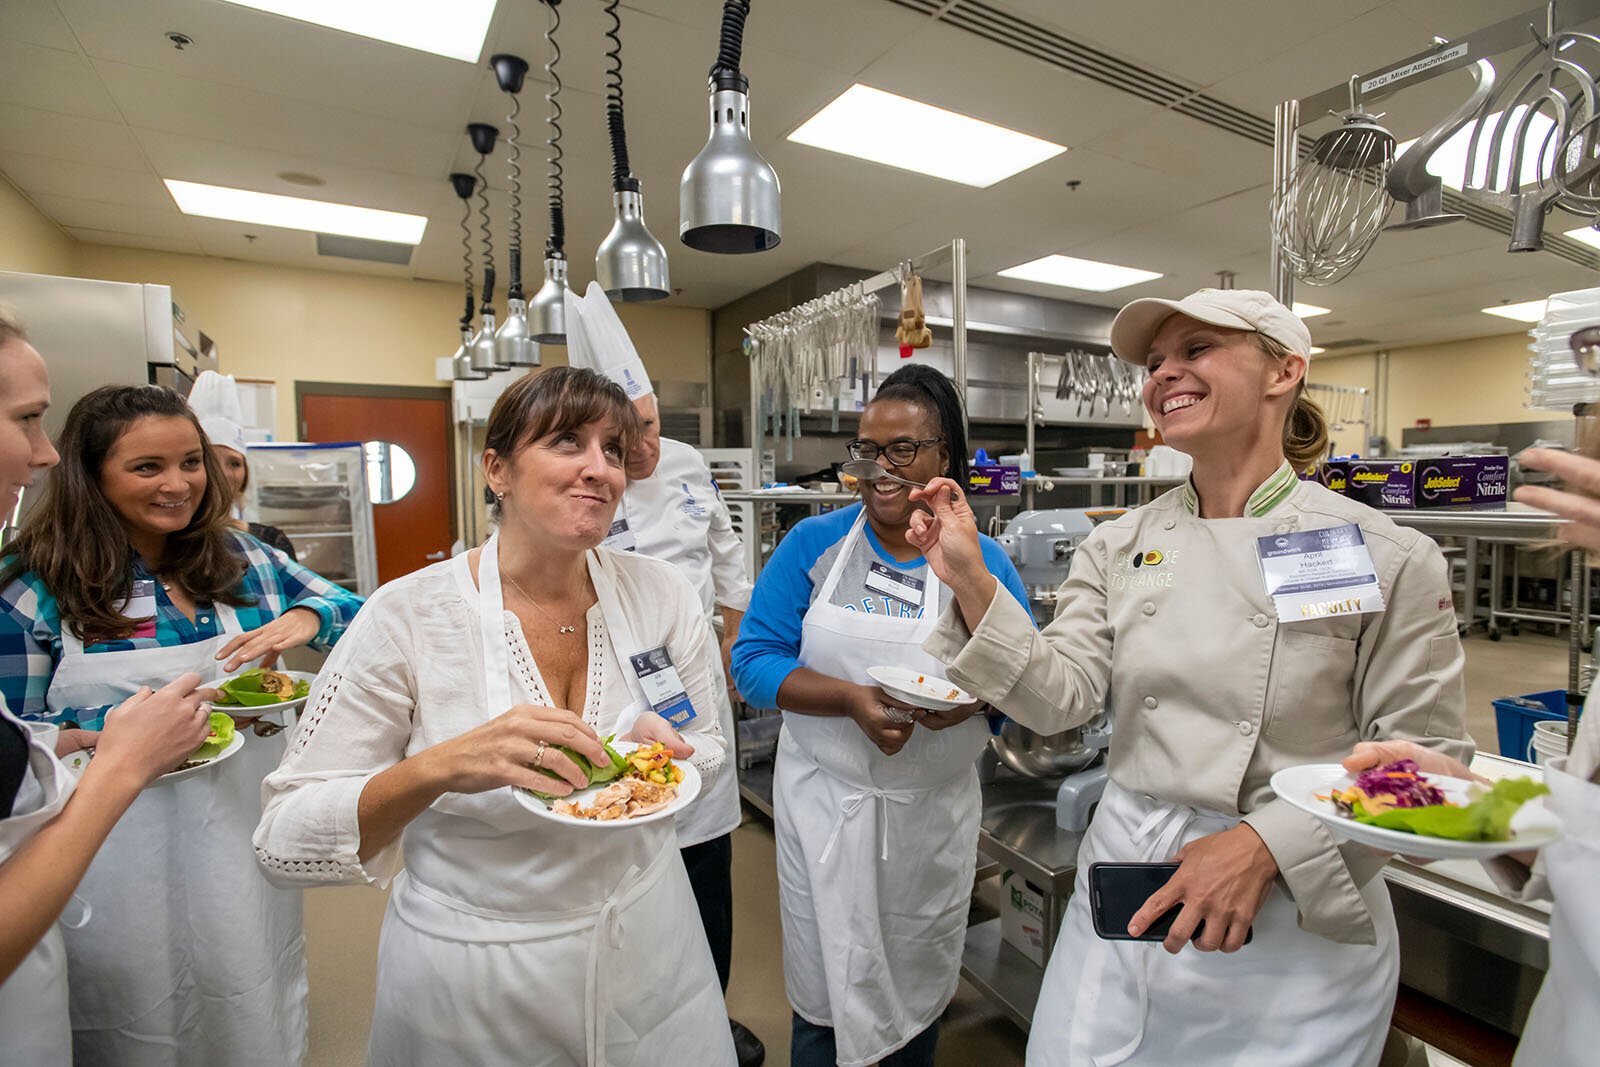 Mental health specialist, chef, and dietitian April Hackert (right in jacket) enjoys plant-forward recipes with participants at culinary medicine training offered by Groundwork Center.